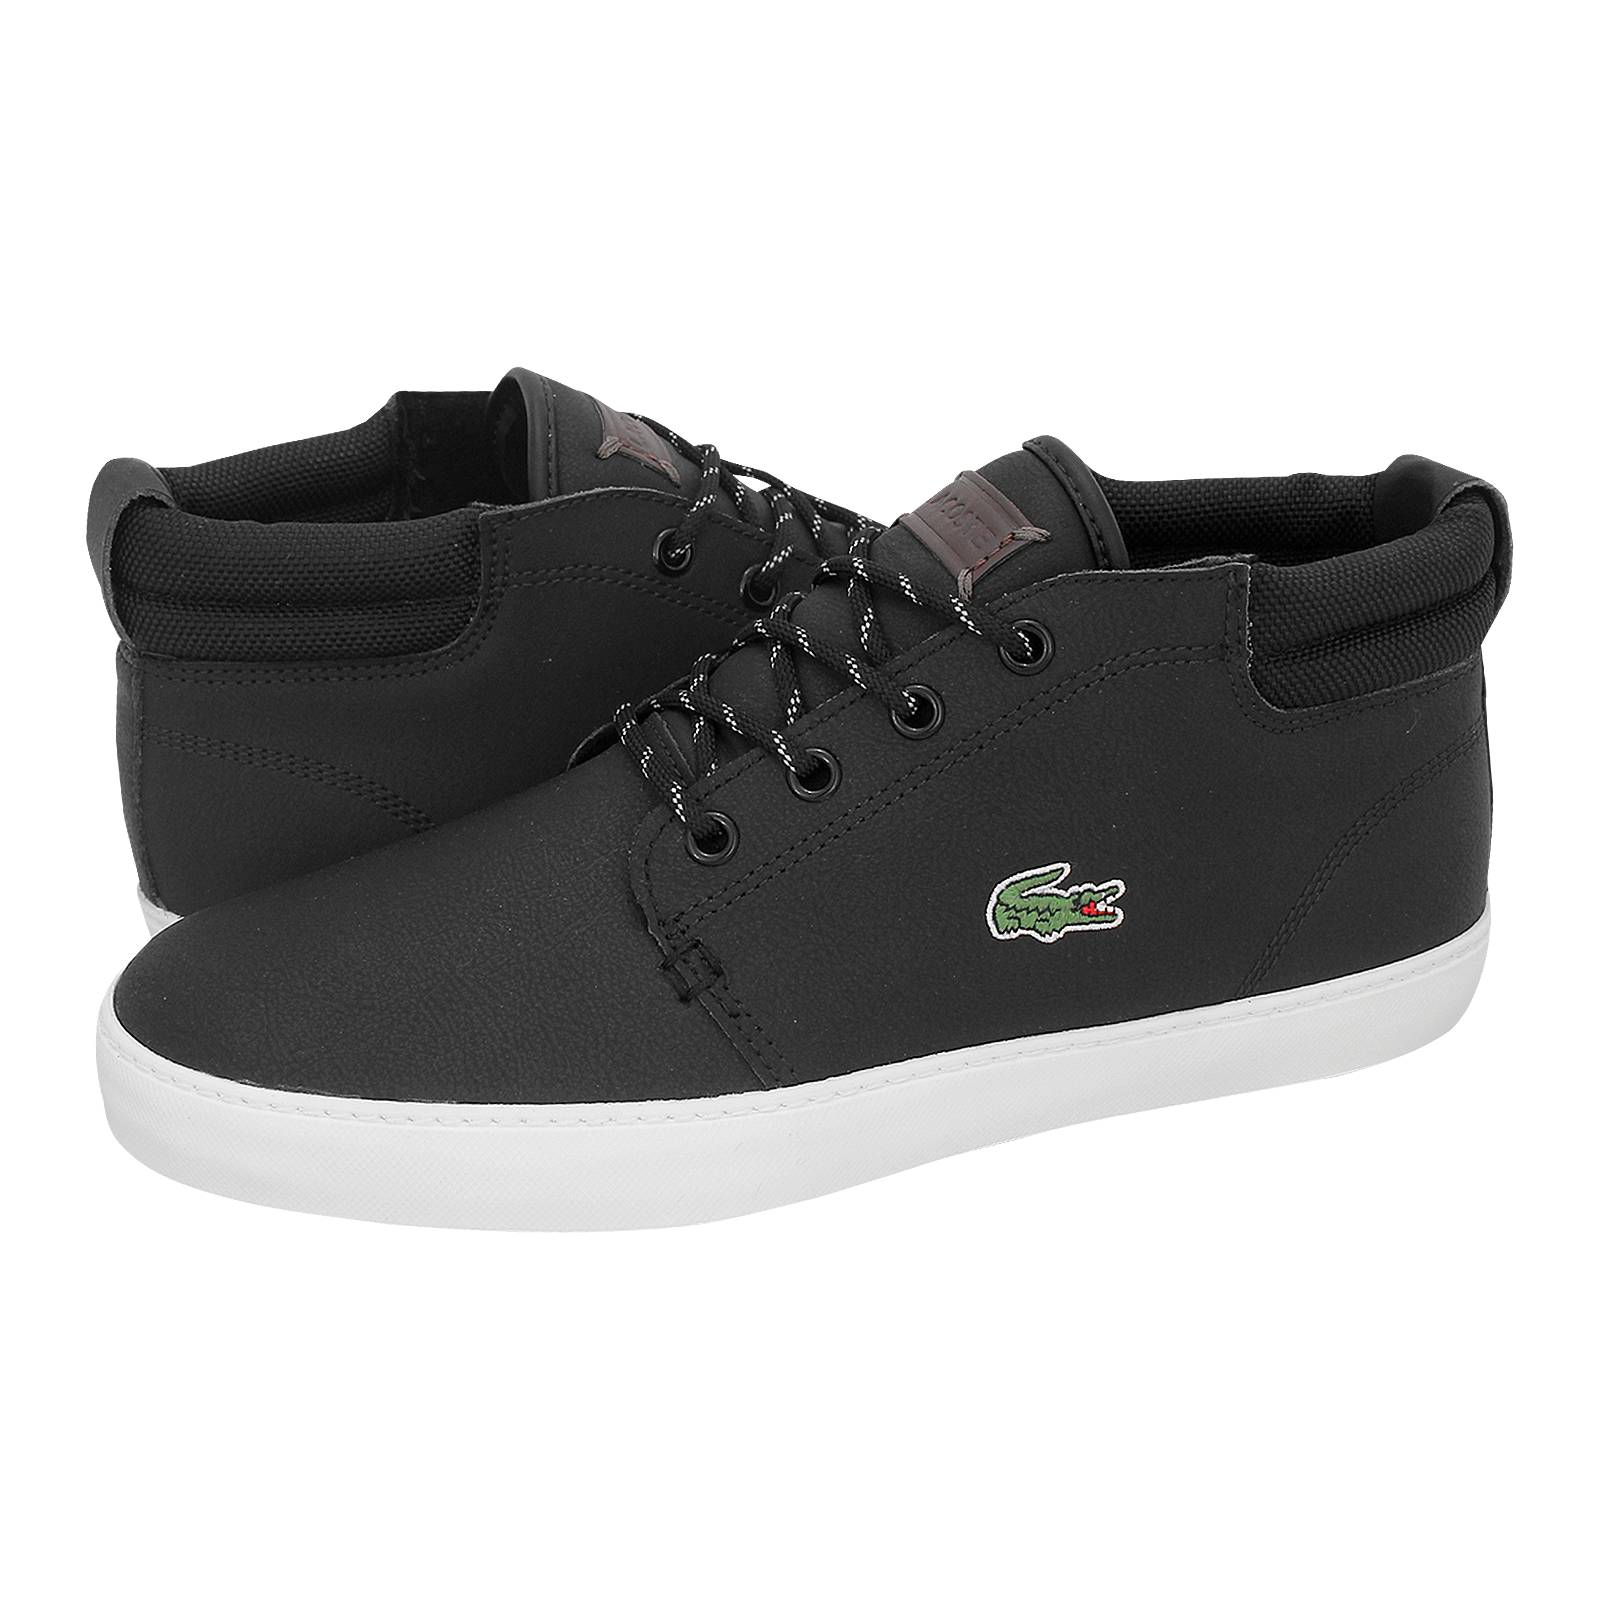 Svin I forhold Bange for at dø Ampthill Terra 319 1 CMA - Lacoste Men's casual low boots made of leather  and fabric - Gianna Kazakou Online